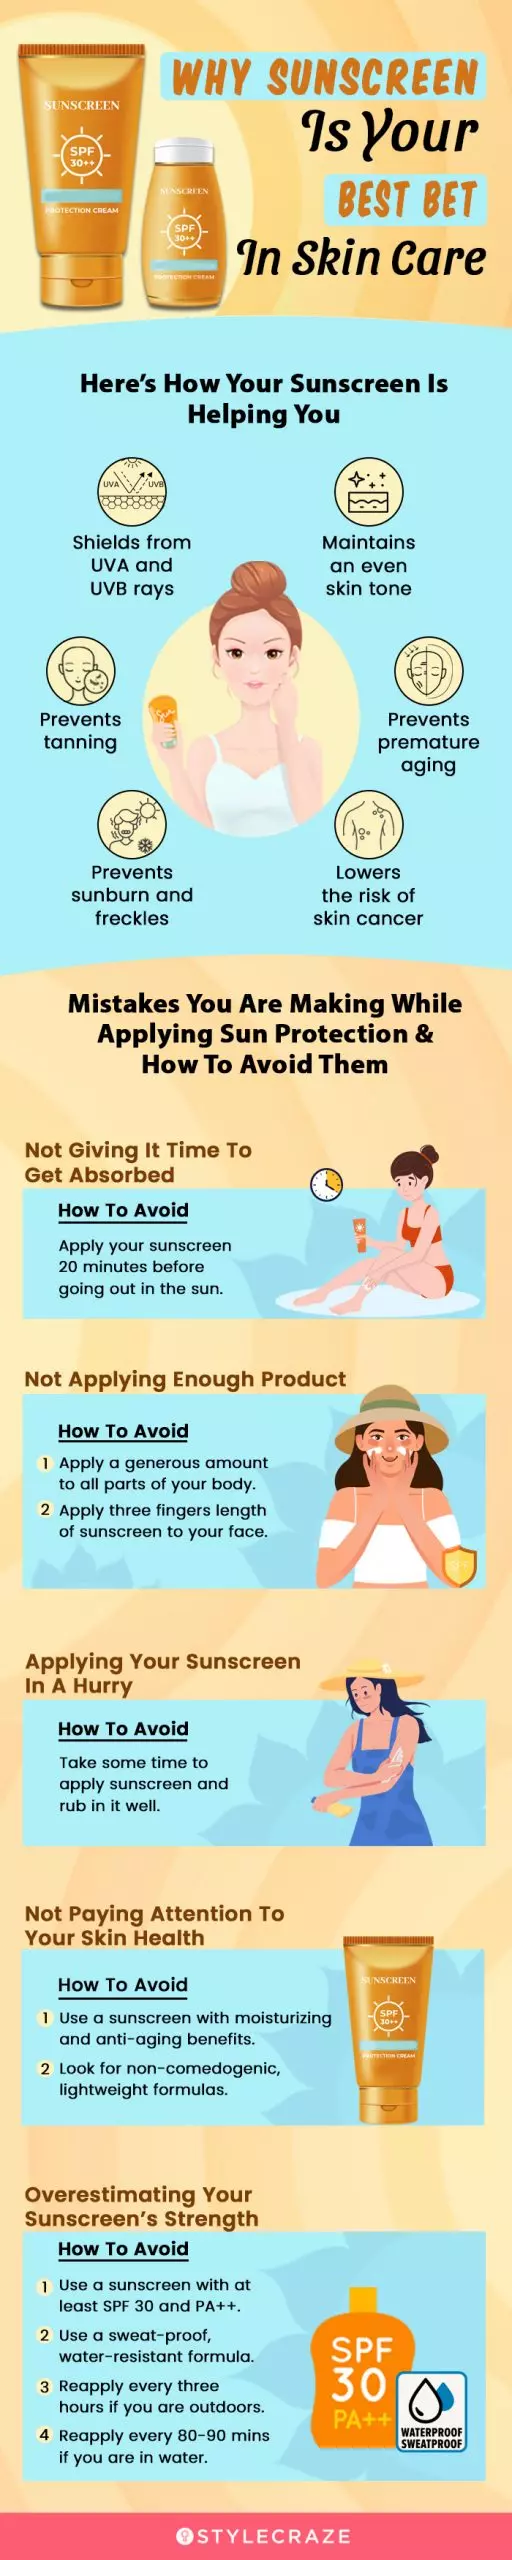 Why Sunscreen Is Your Best Bet In Skin Care (infographic)